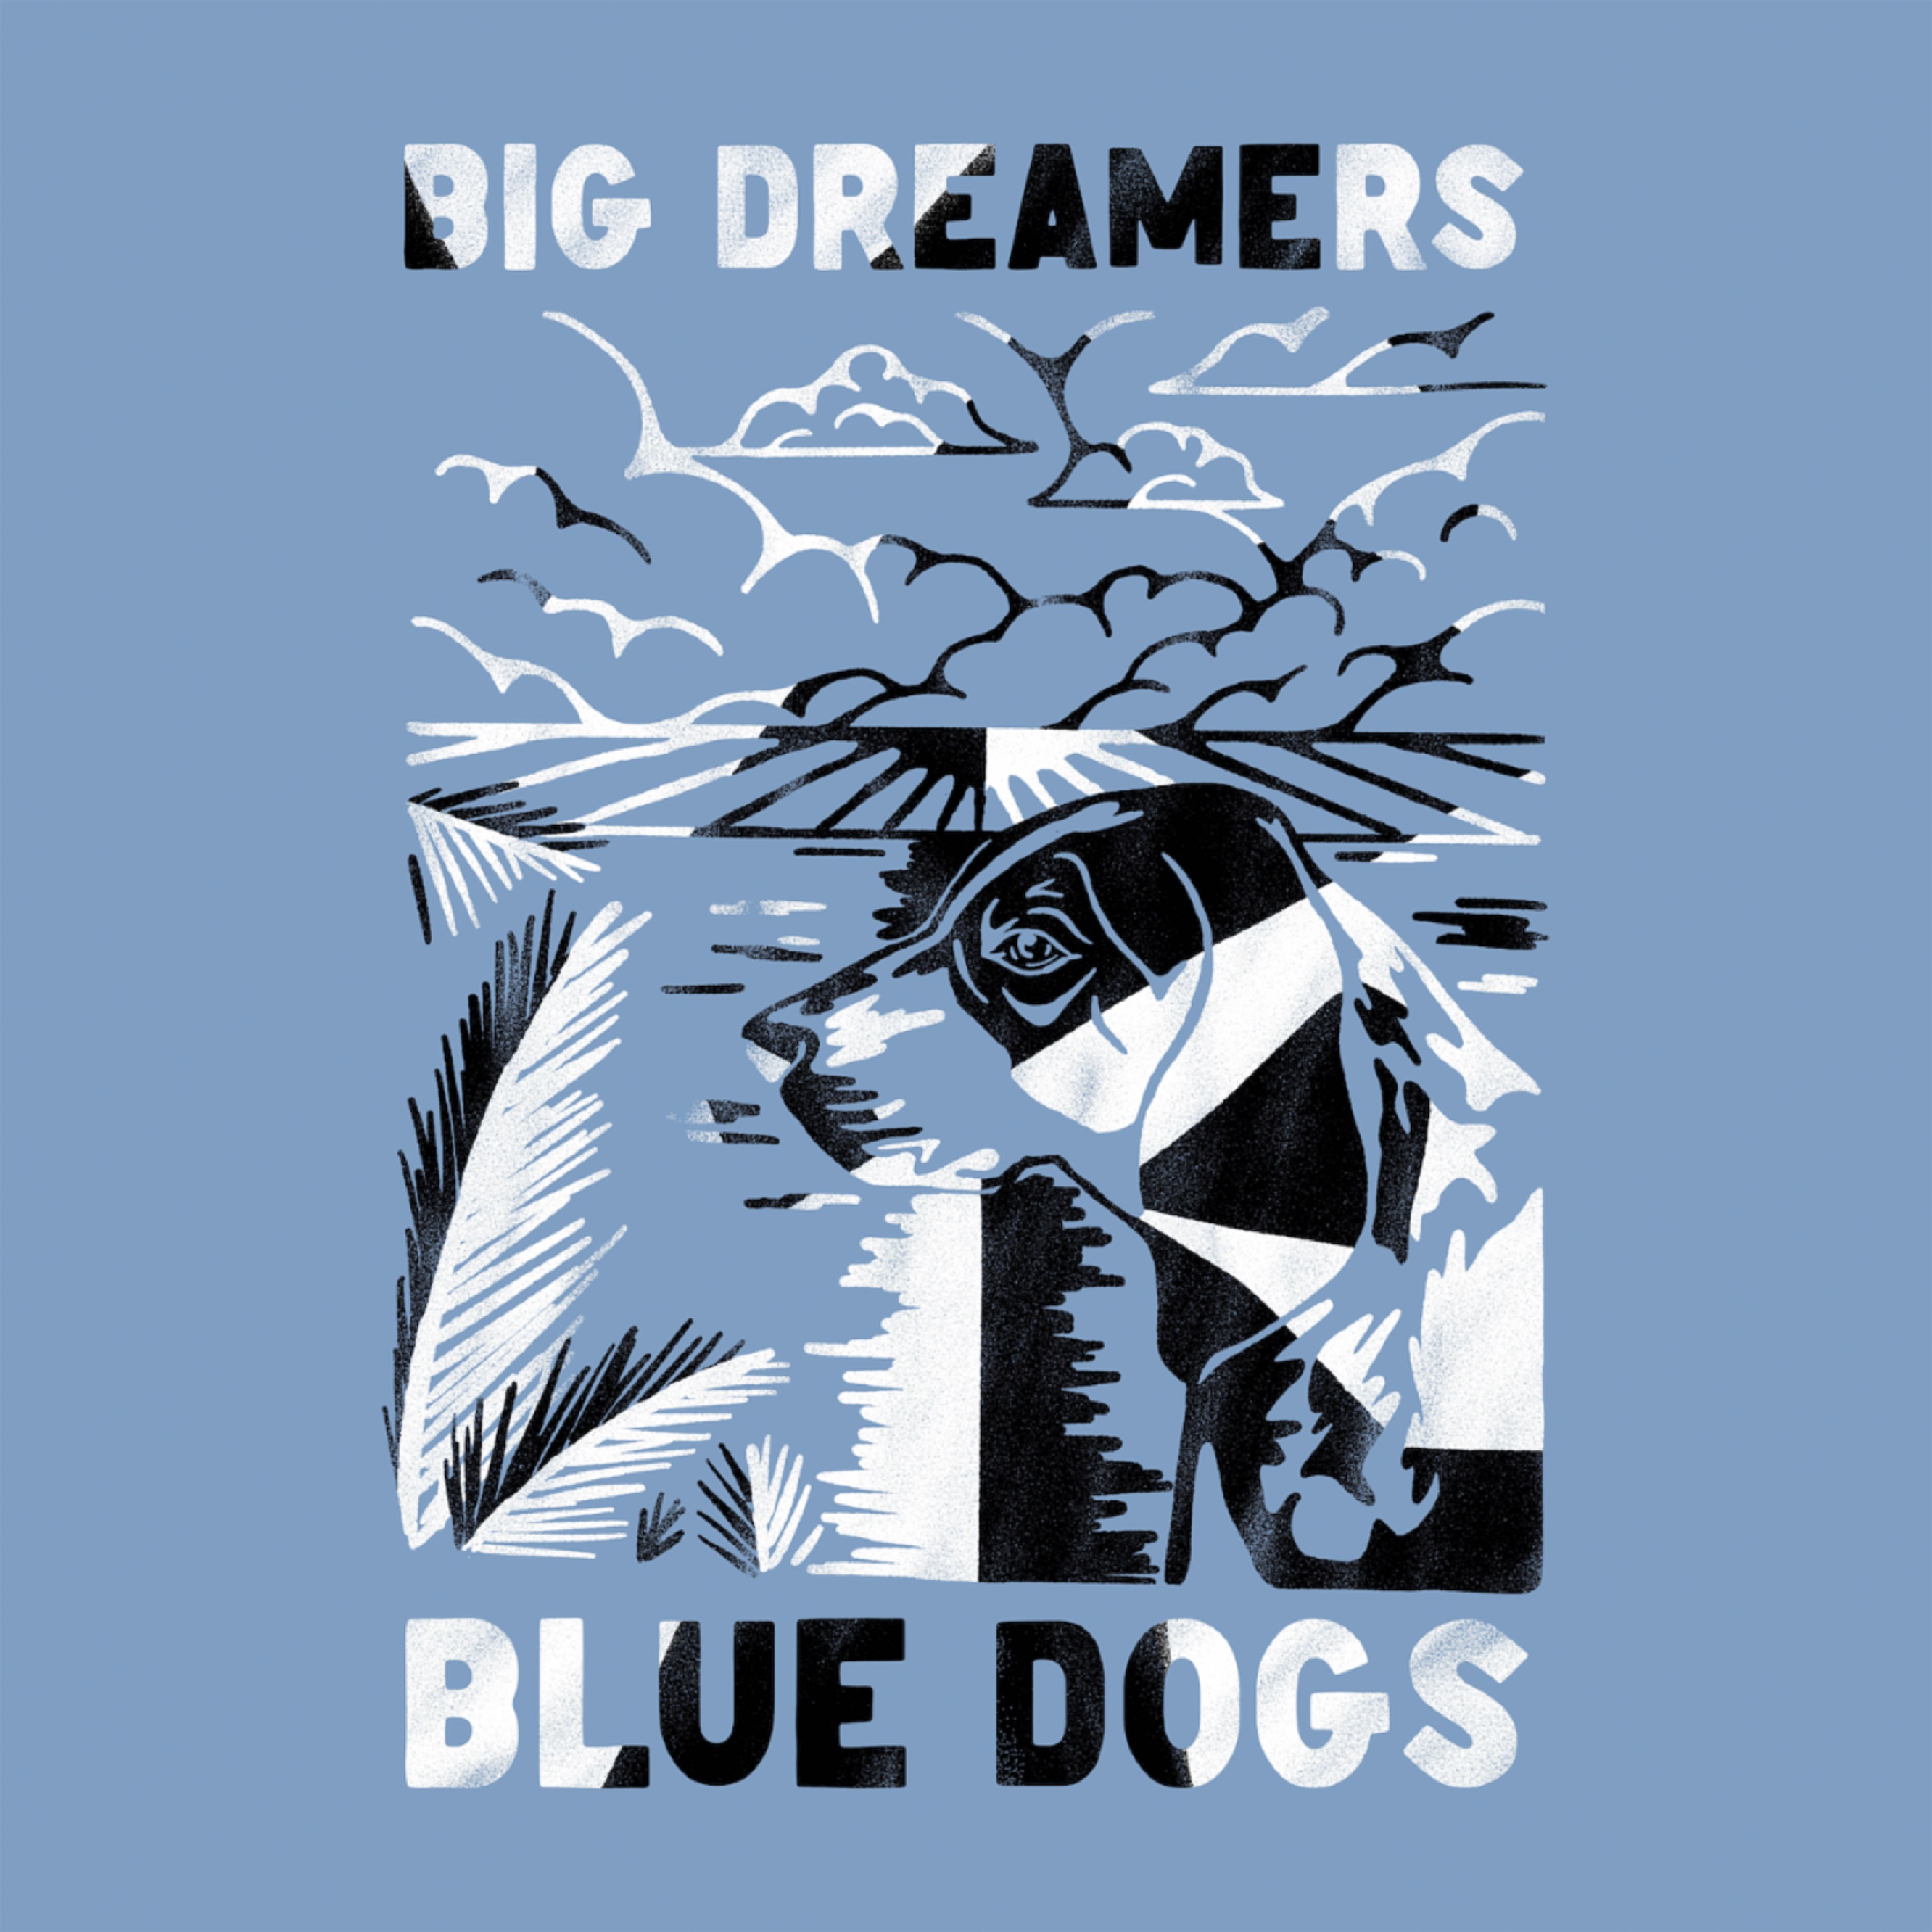 South Carolina Rockers The Blue Dogs Return With Brand New LP "Big Dreamers"